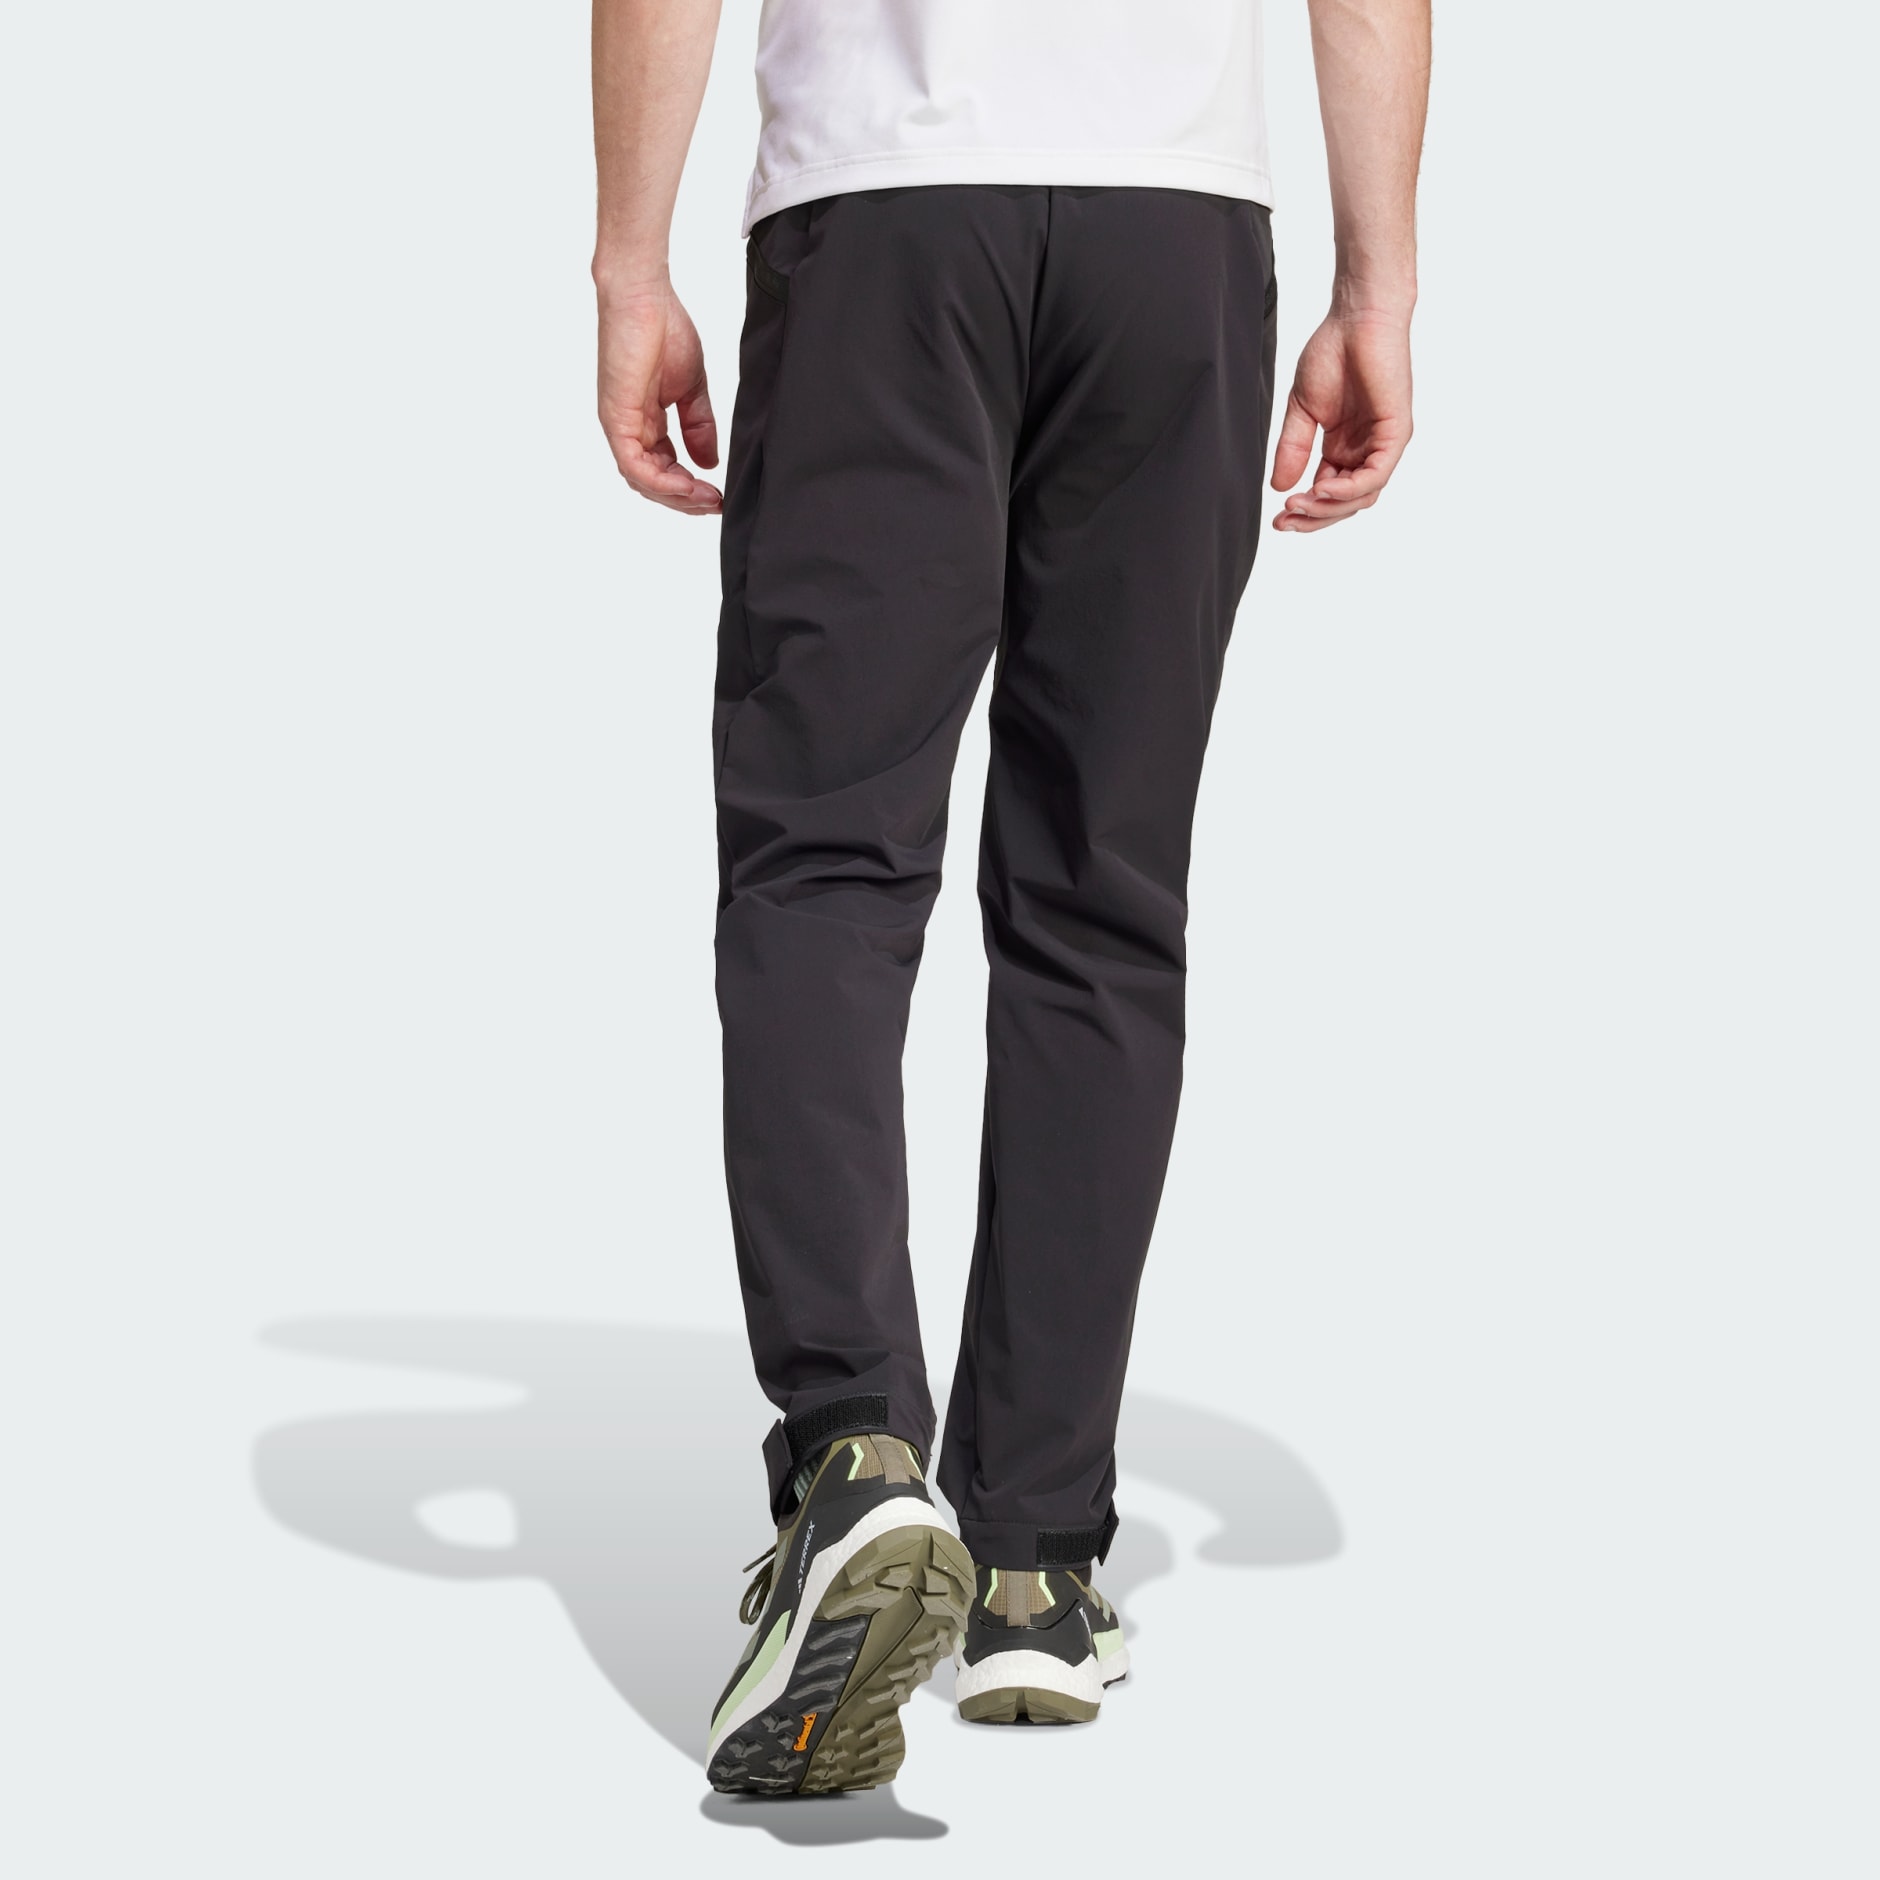 Clothing - Terrex Xperior Pants - Black | adidas South Africa